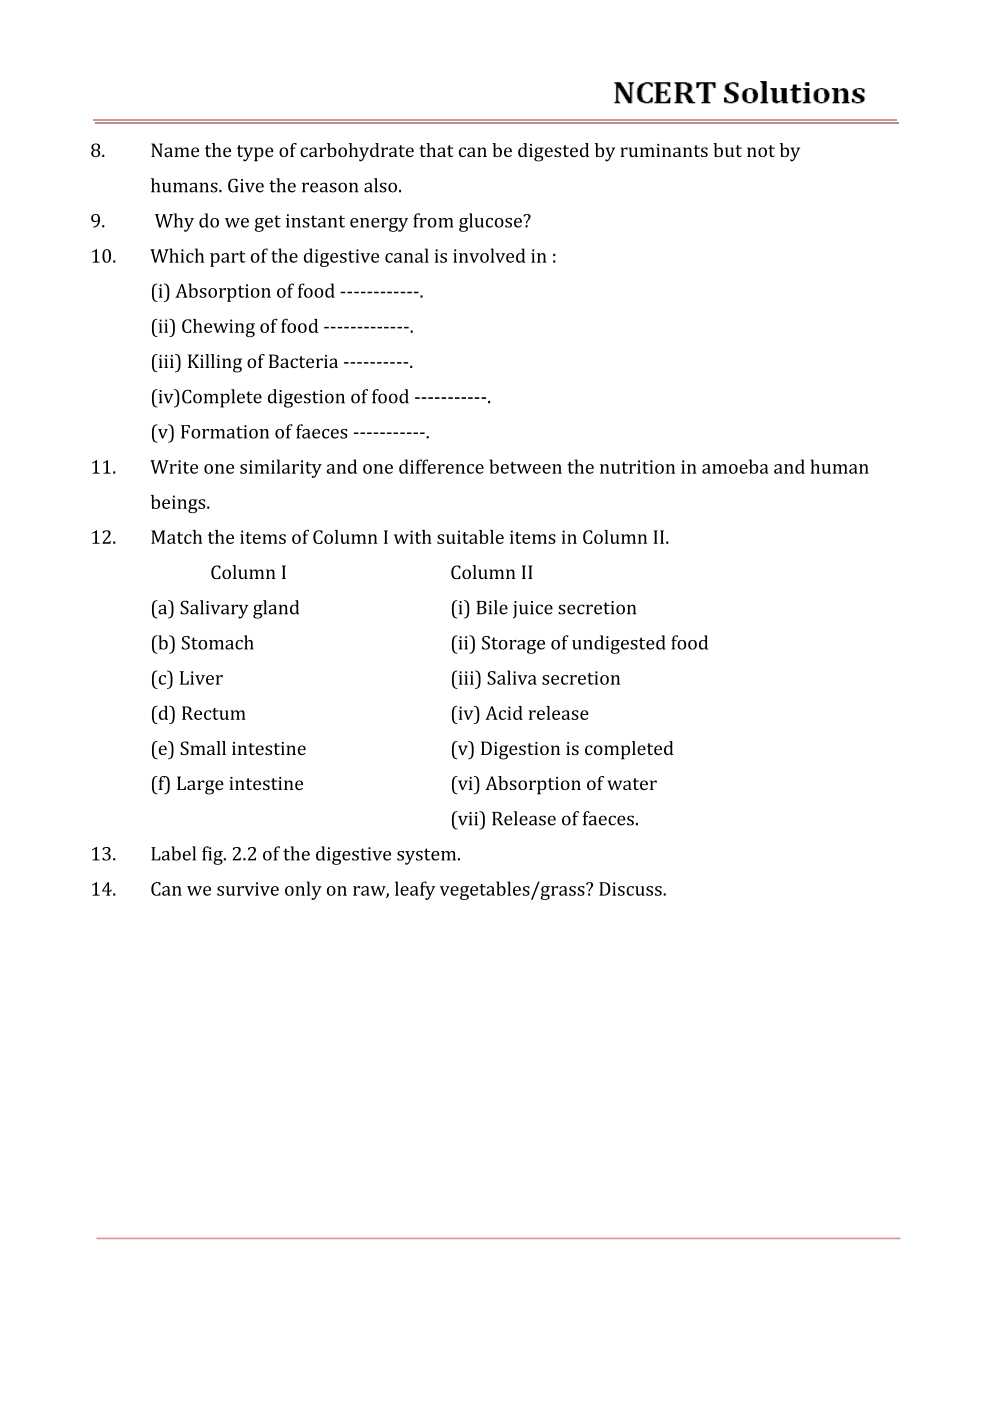 NCERT Solutions For Class 7 science Chapter 2 Nutrition in Animals